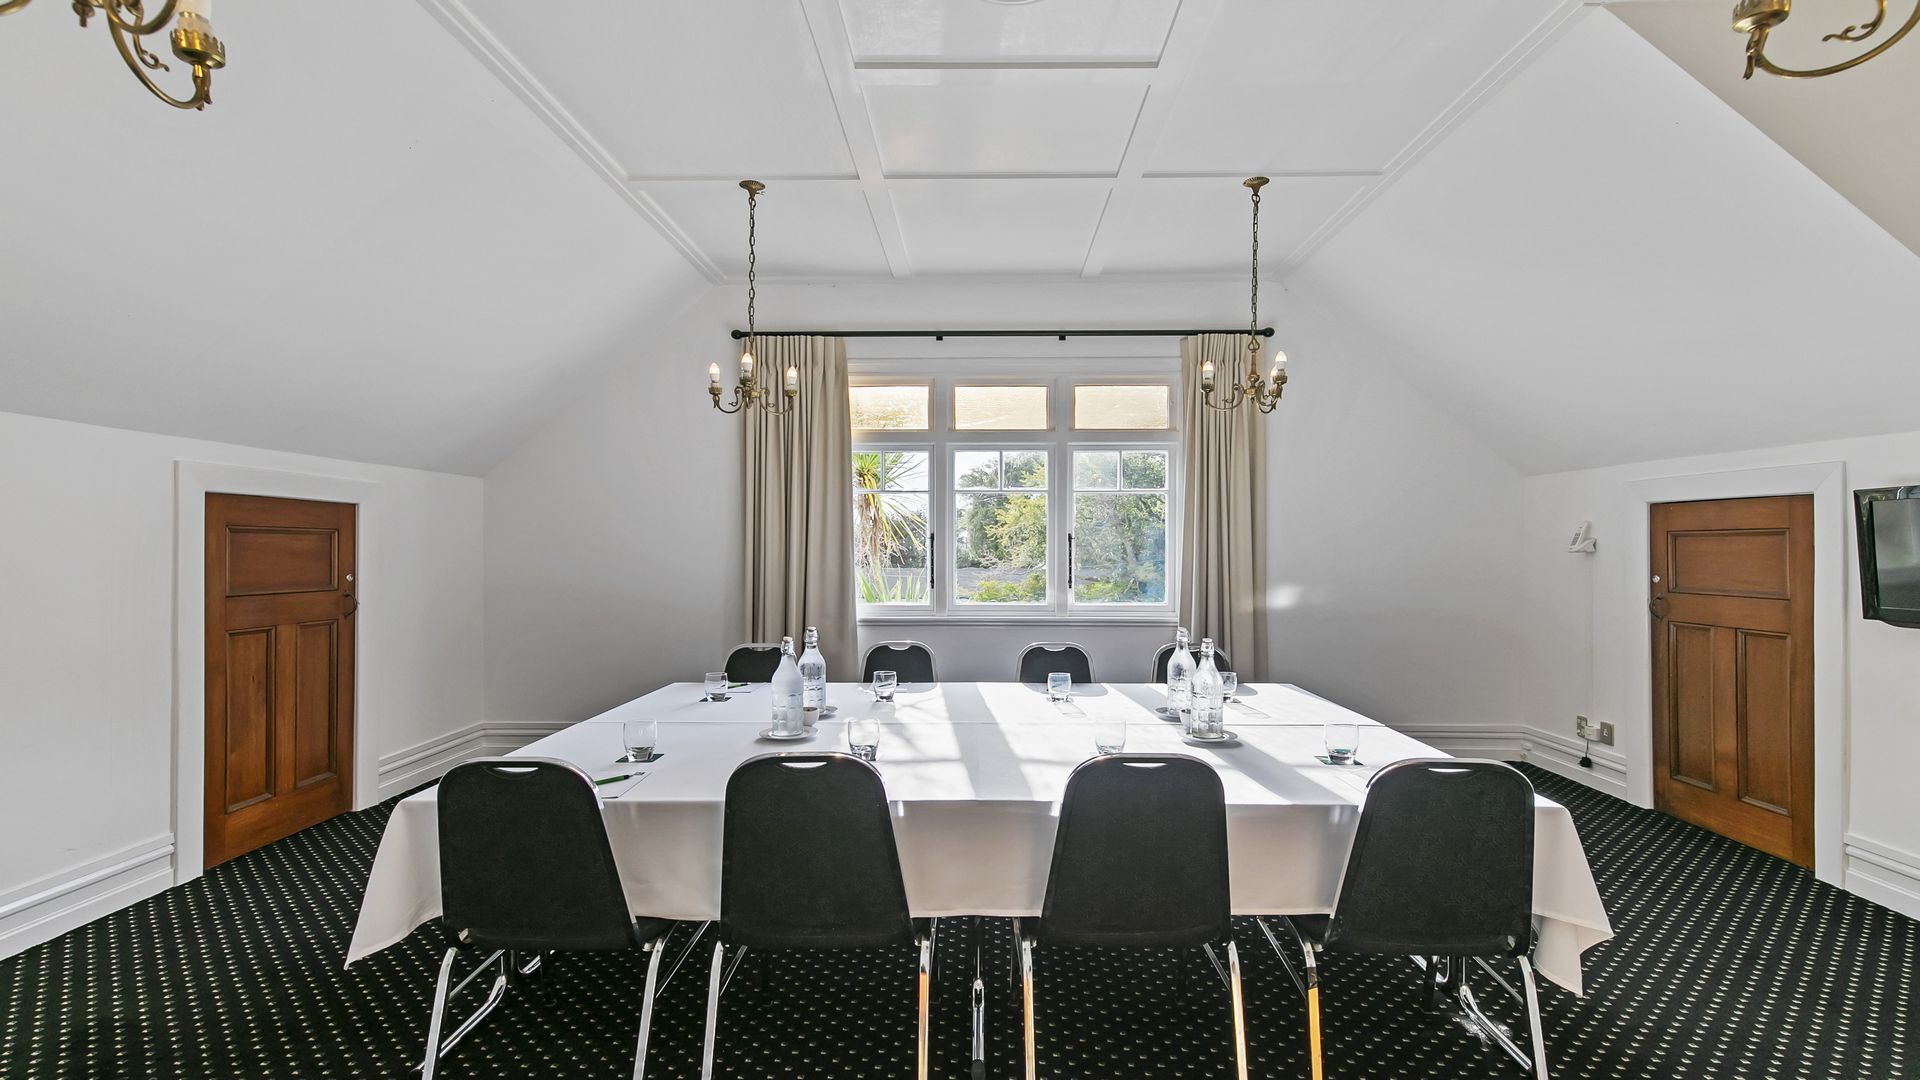 An Elegant Meeting Room For Hire At The Parnell Hotel & Conference Centre